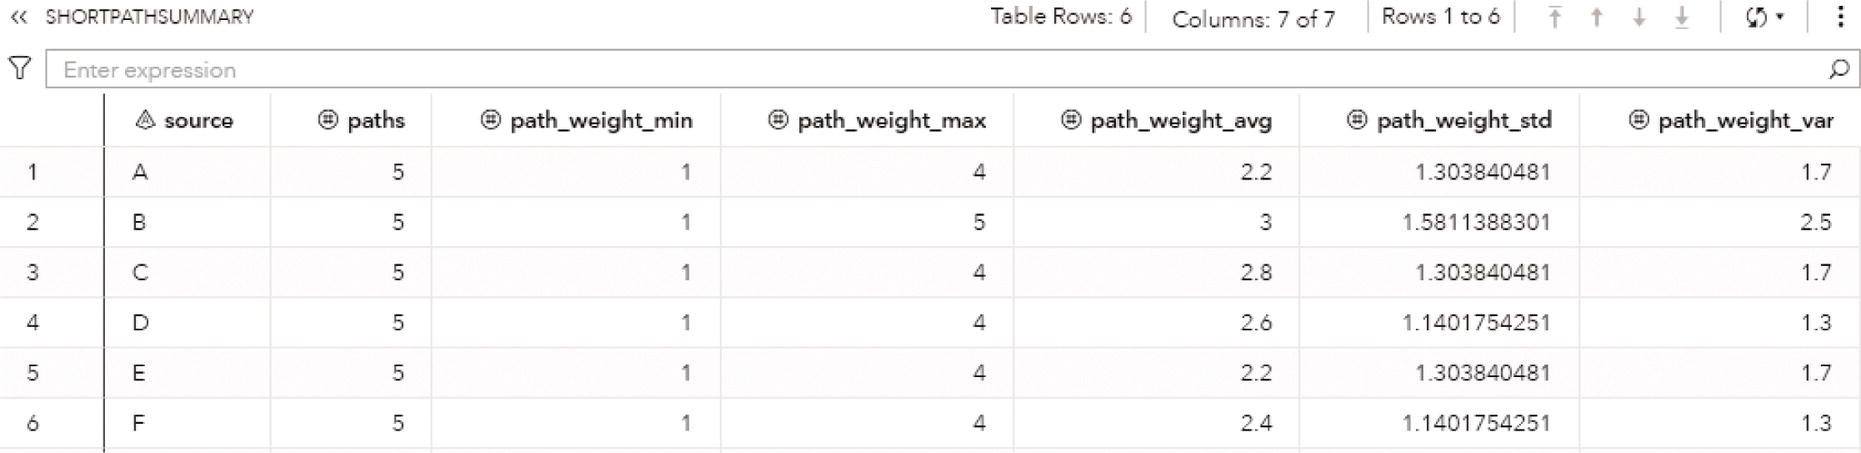 Screenshot of the summary statistics for the shortest path solution.